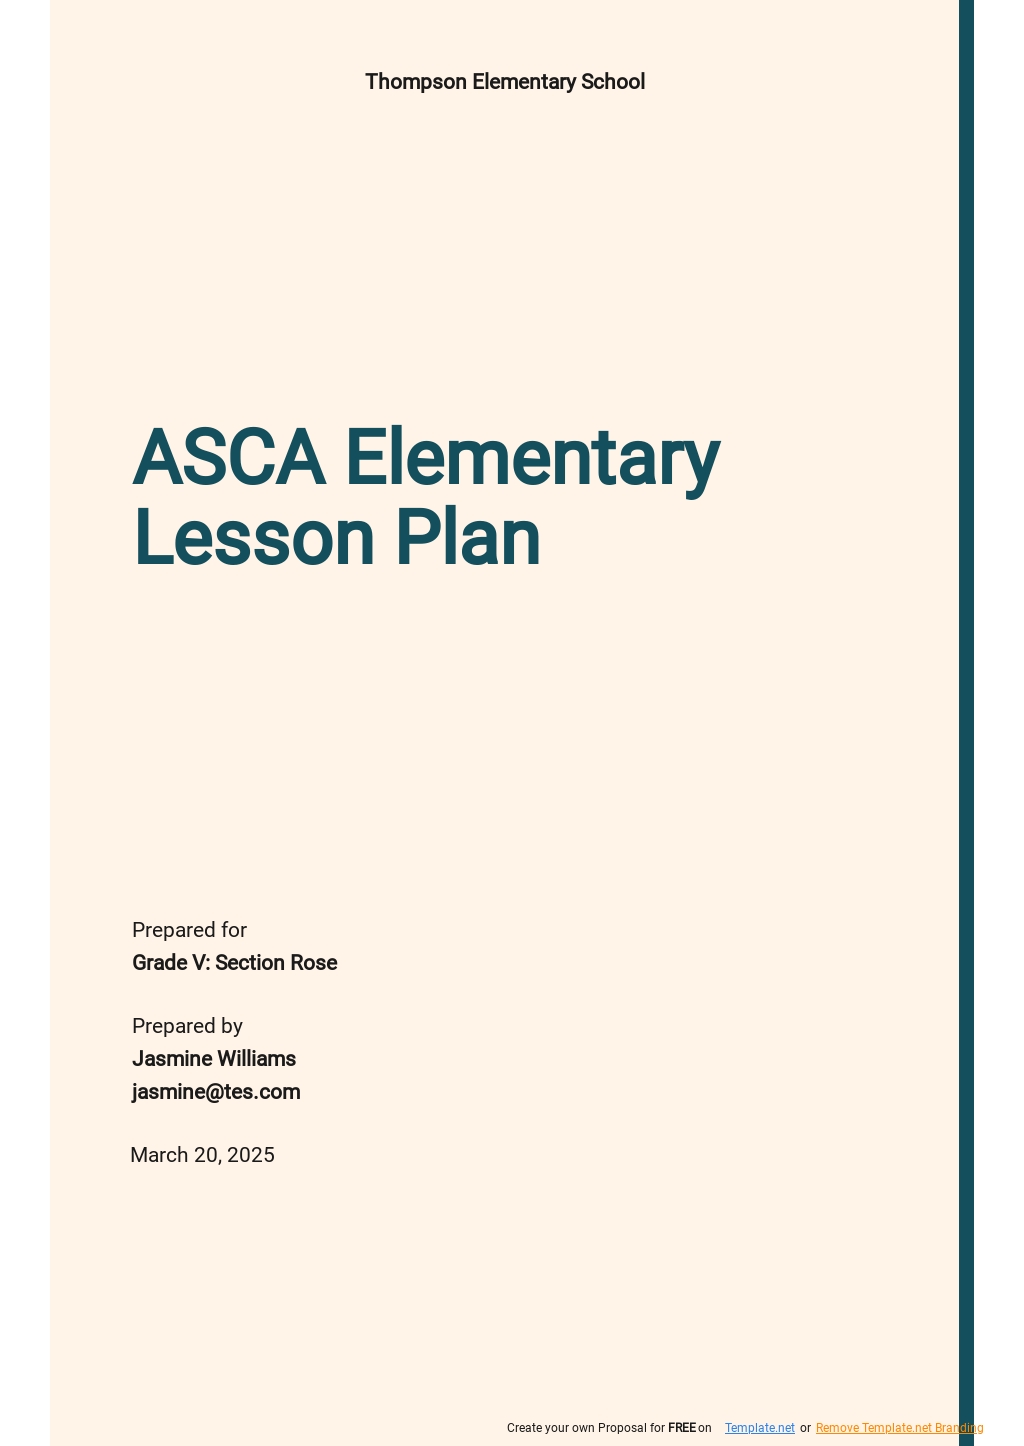 ASCA Elementary Lesson Plan Template.jpe